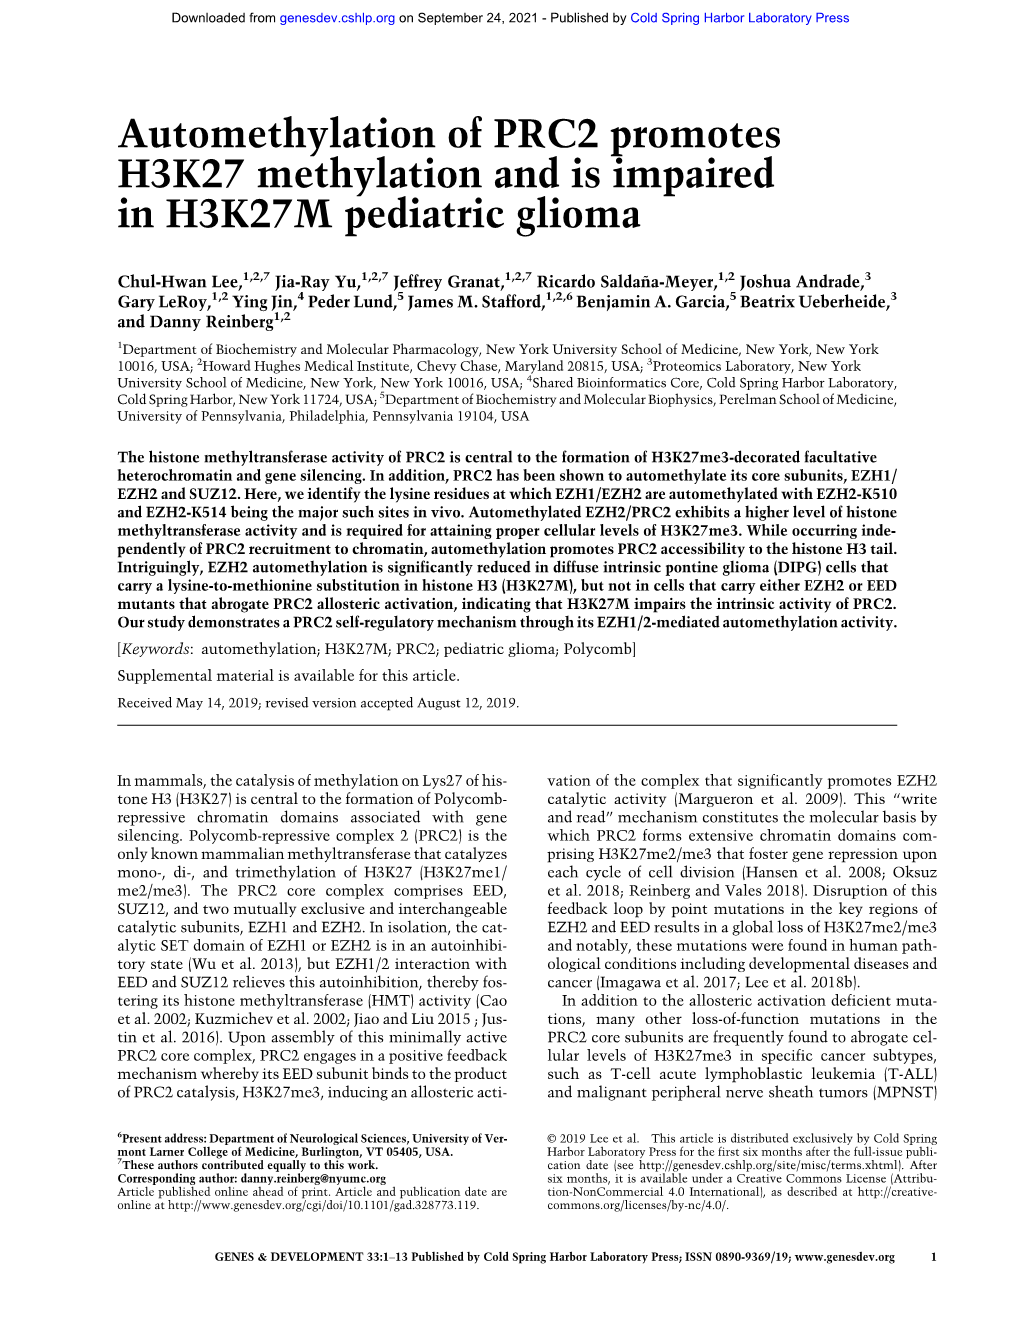 Automethylation of PRC2 Promotes H3K27 Methylation and Is Impaired in H3K27M Pediatric Glioma